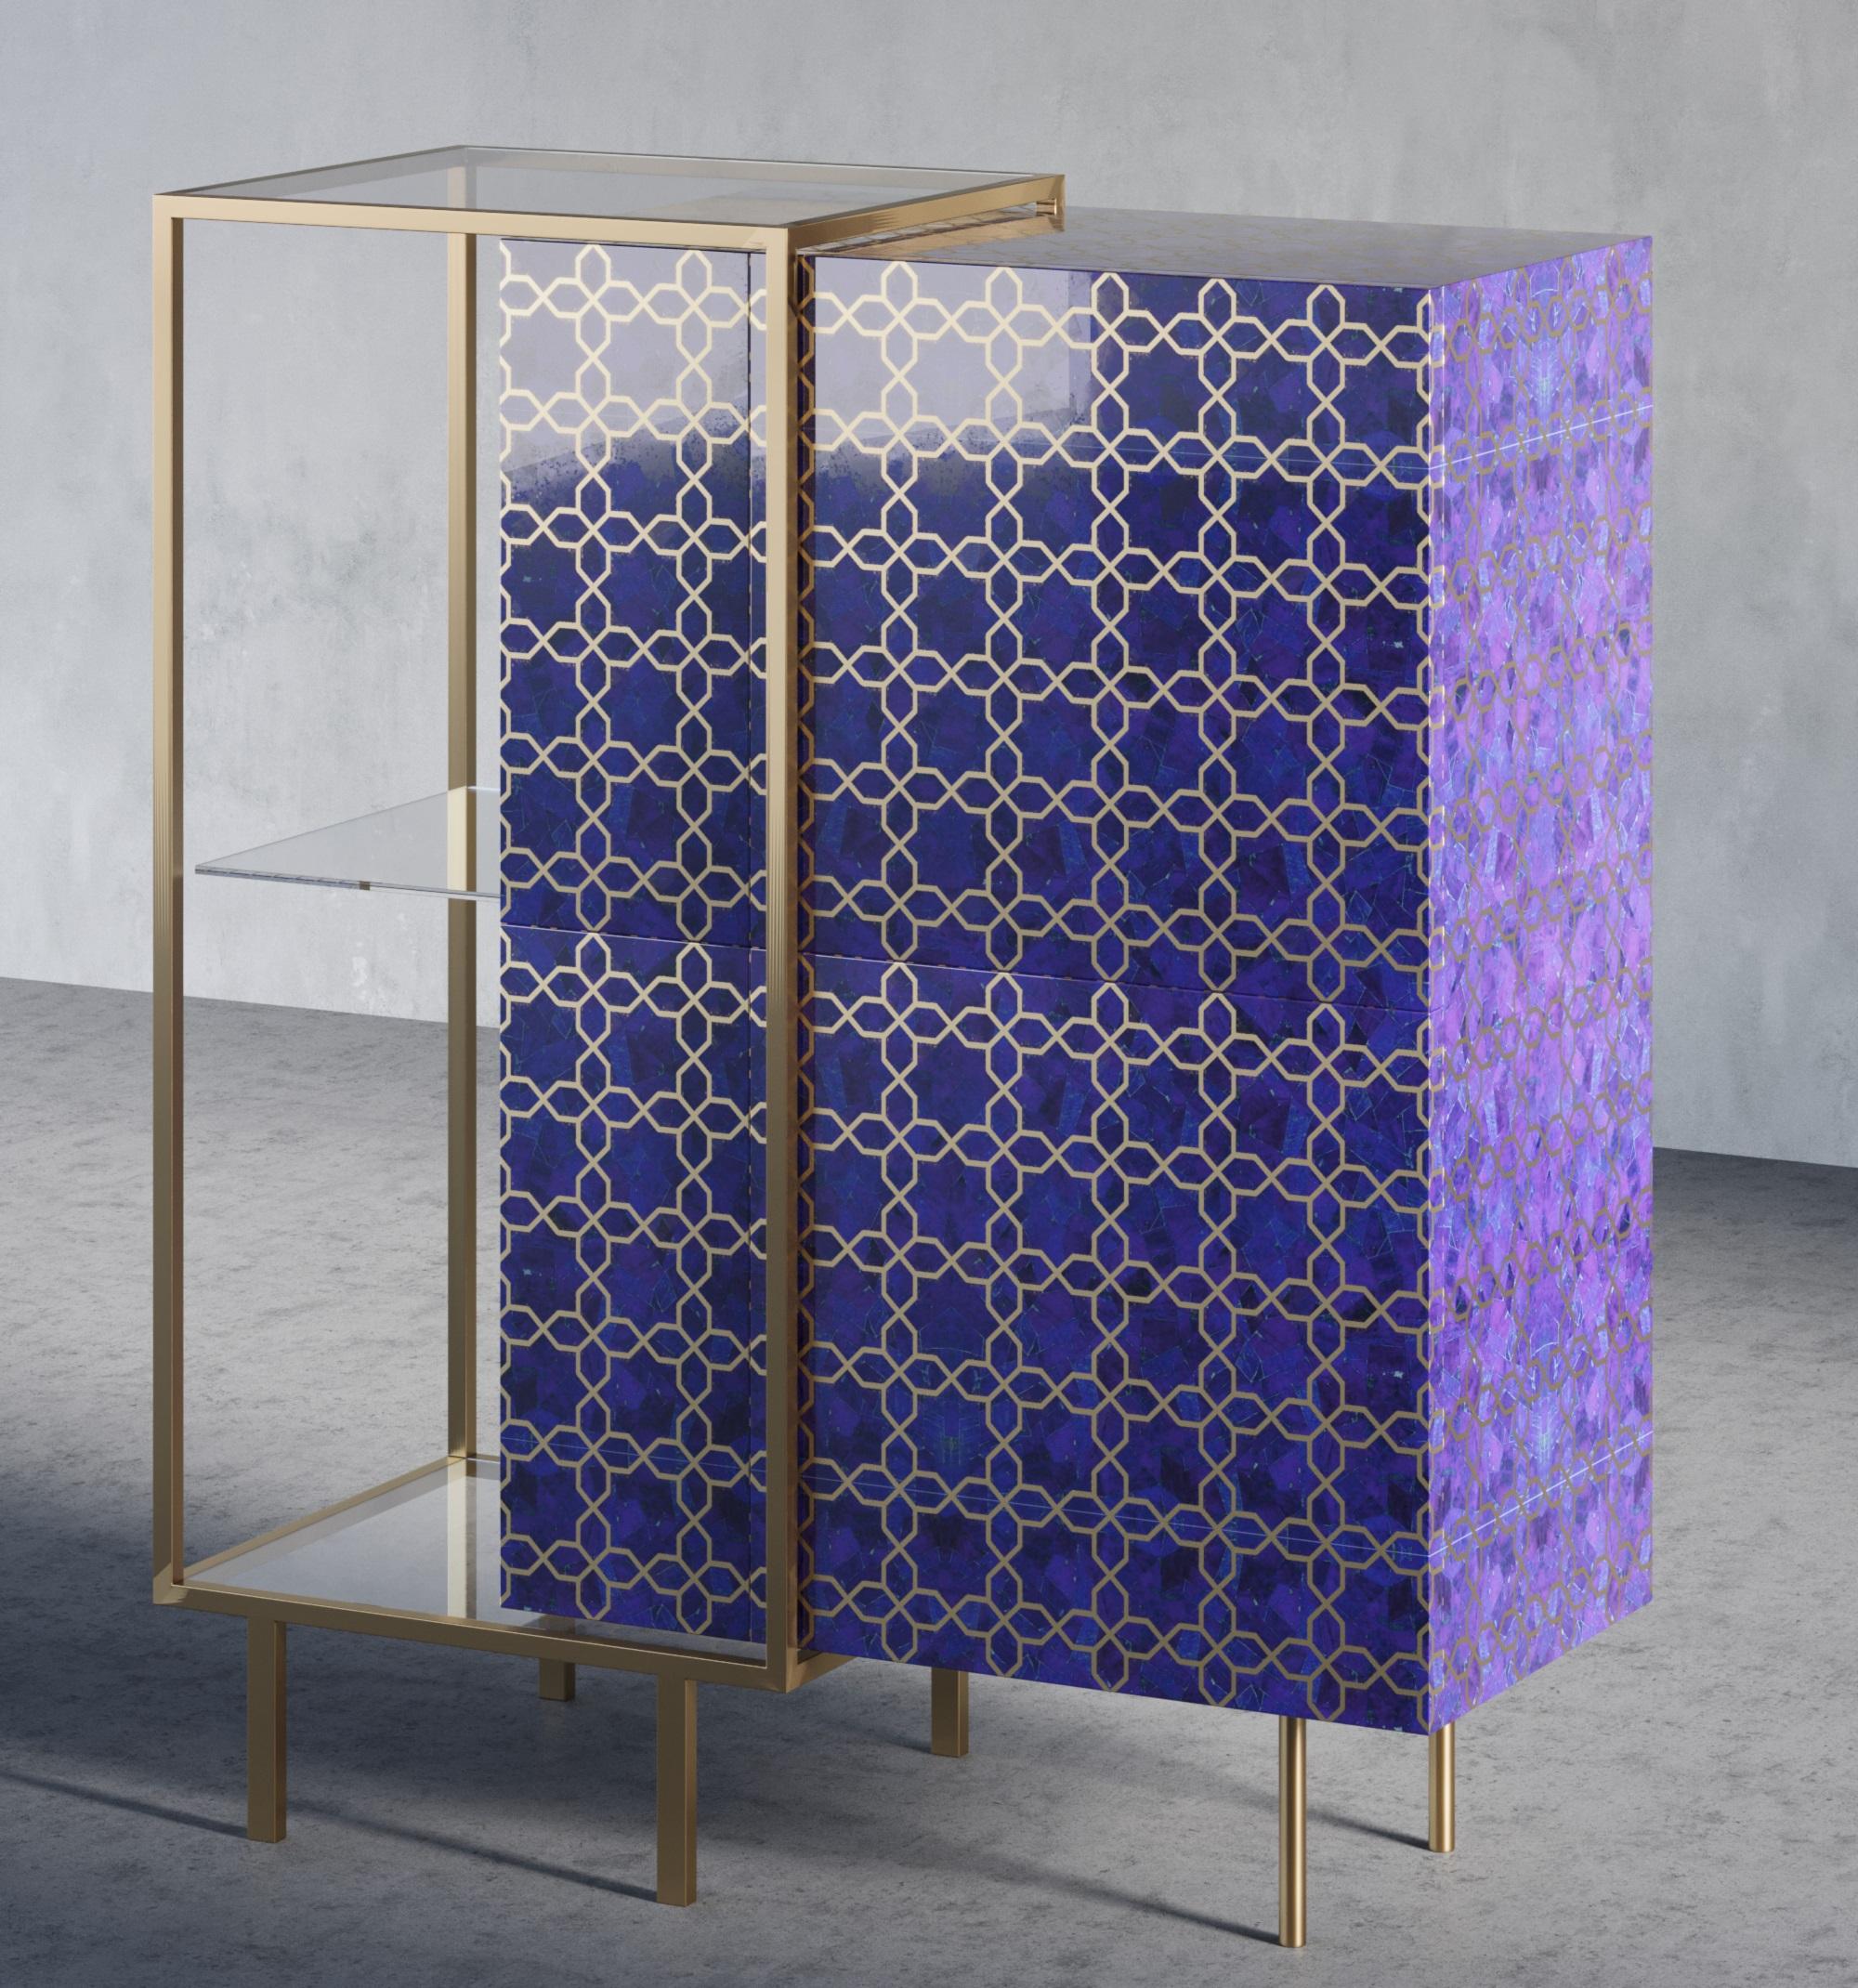 The deep blue color of Lapiz Lazuli stone creates a rich and opulent feel, while the intricate pattern in Brass adds a sense of movement and energy to the design. Lapis Lazuli has been used in traditional medicine and is believed to have healing